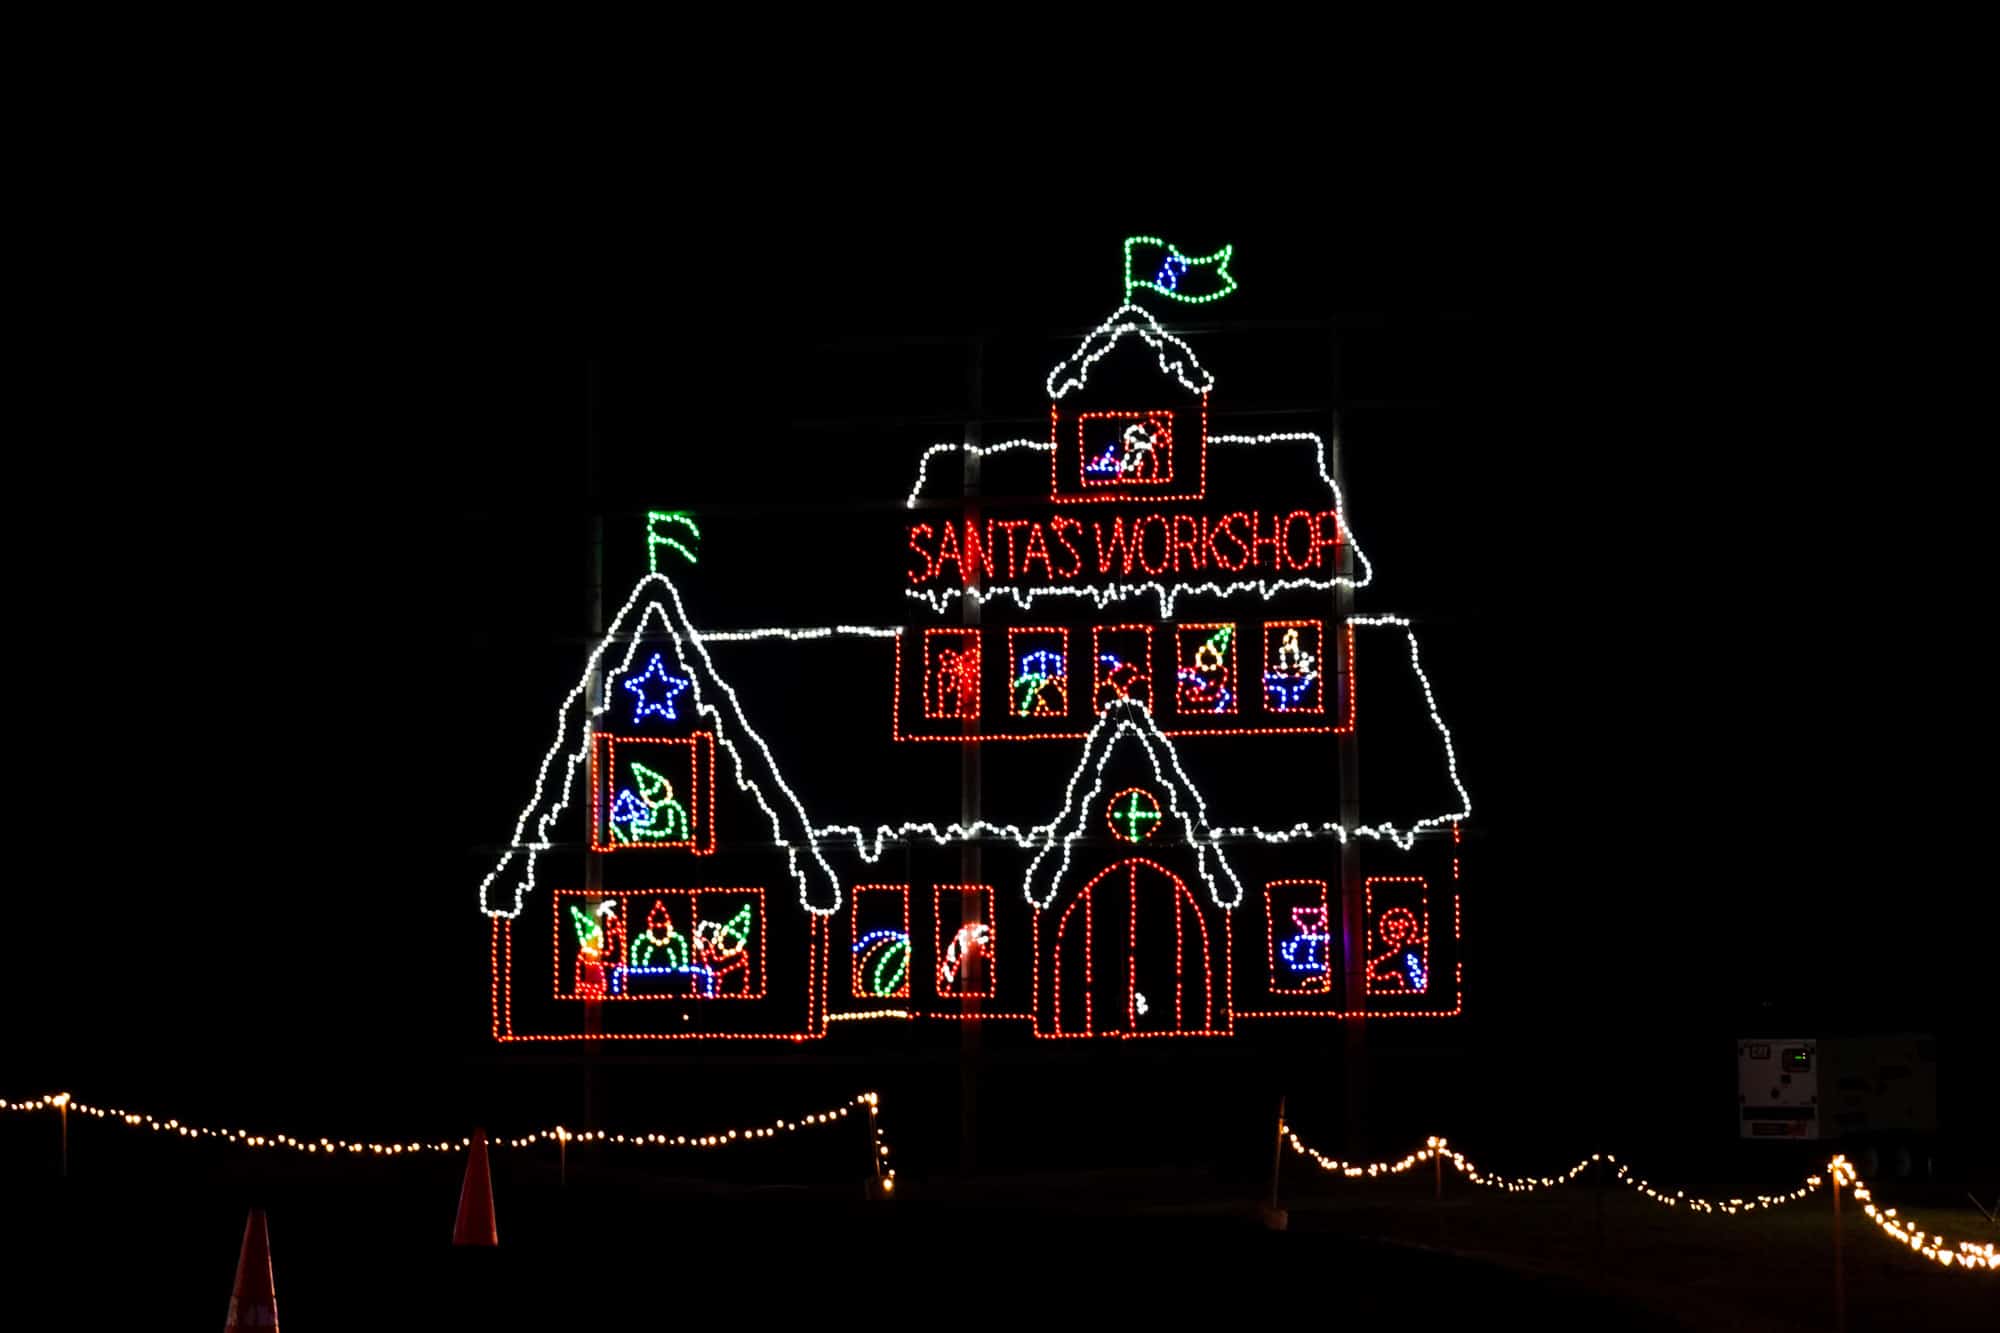 Christmas light display shaped like a house with a sign for "Santa's Workshop"